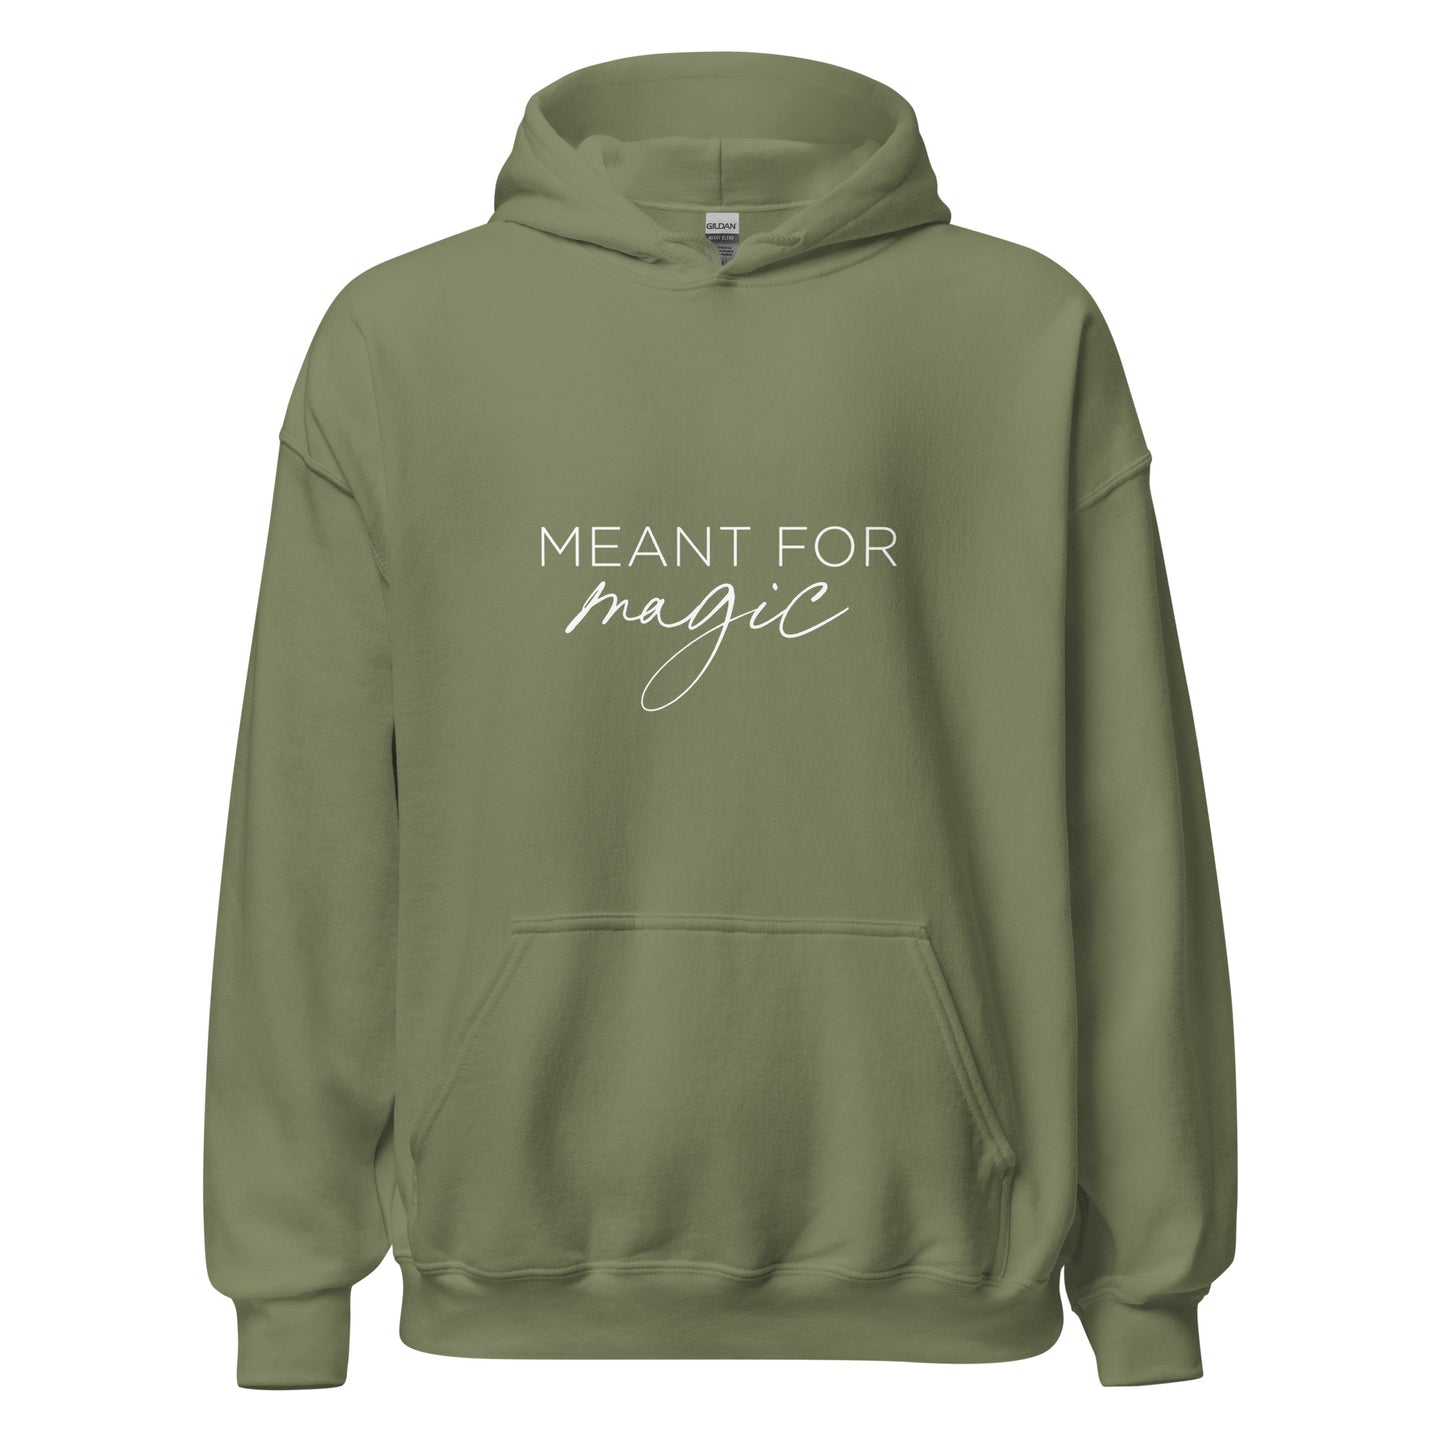 The Meant for Magic Hoodie